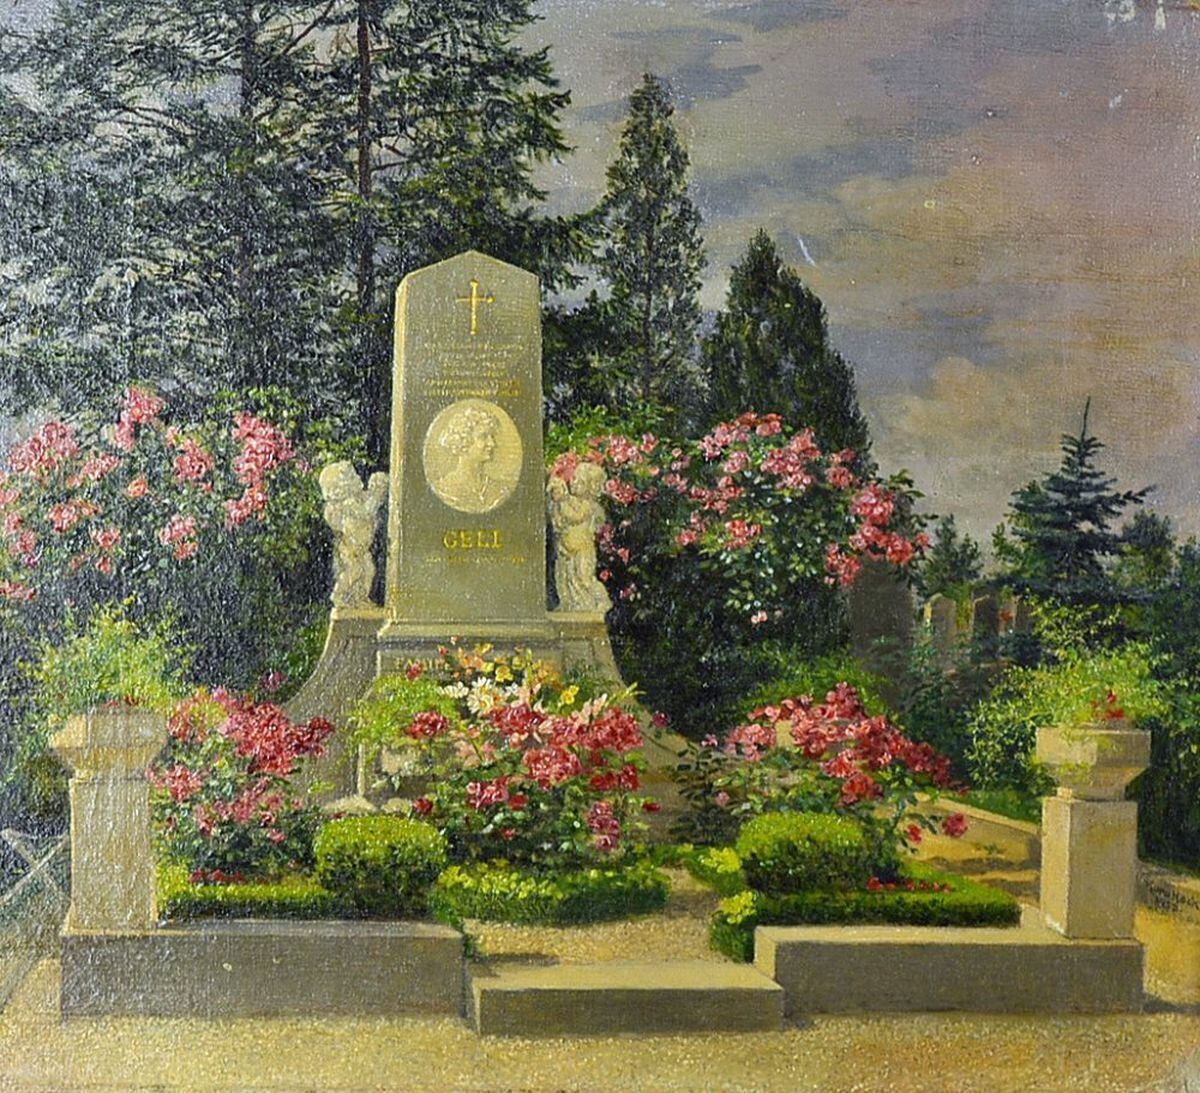 An unsigned painting of the grave of Geli Raubel’s, Adolf Hitler’s niece and possible lover, which is likely to have been painted by Hitler himself